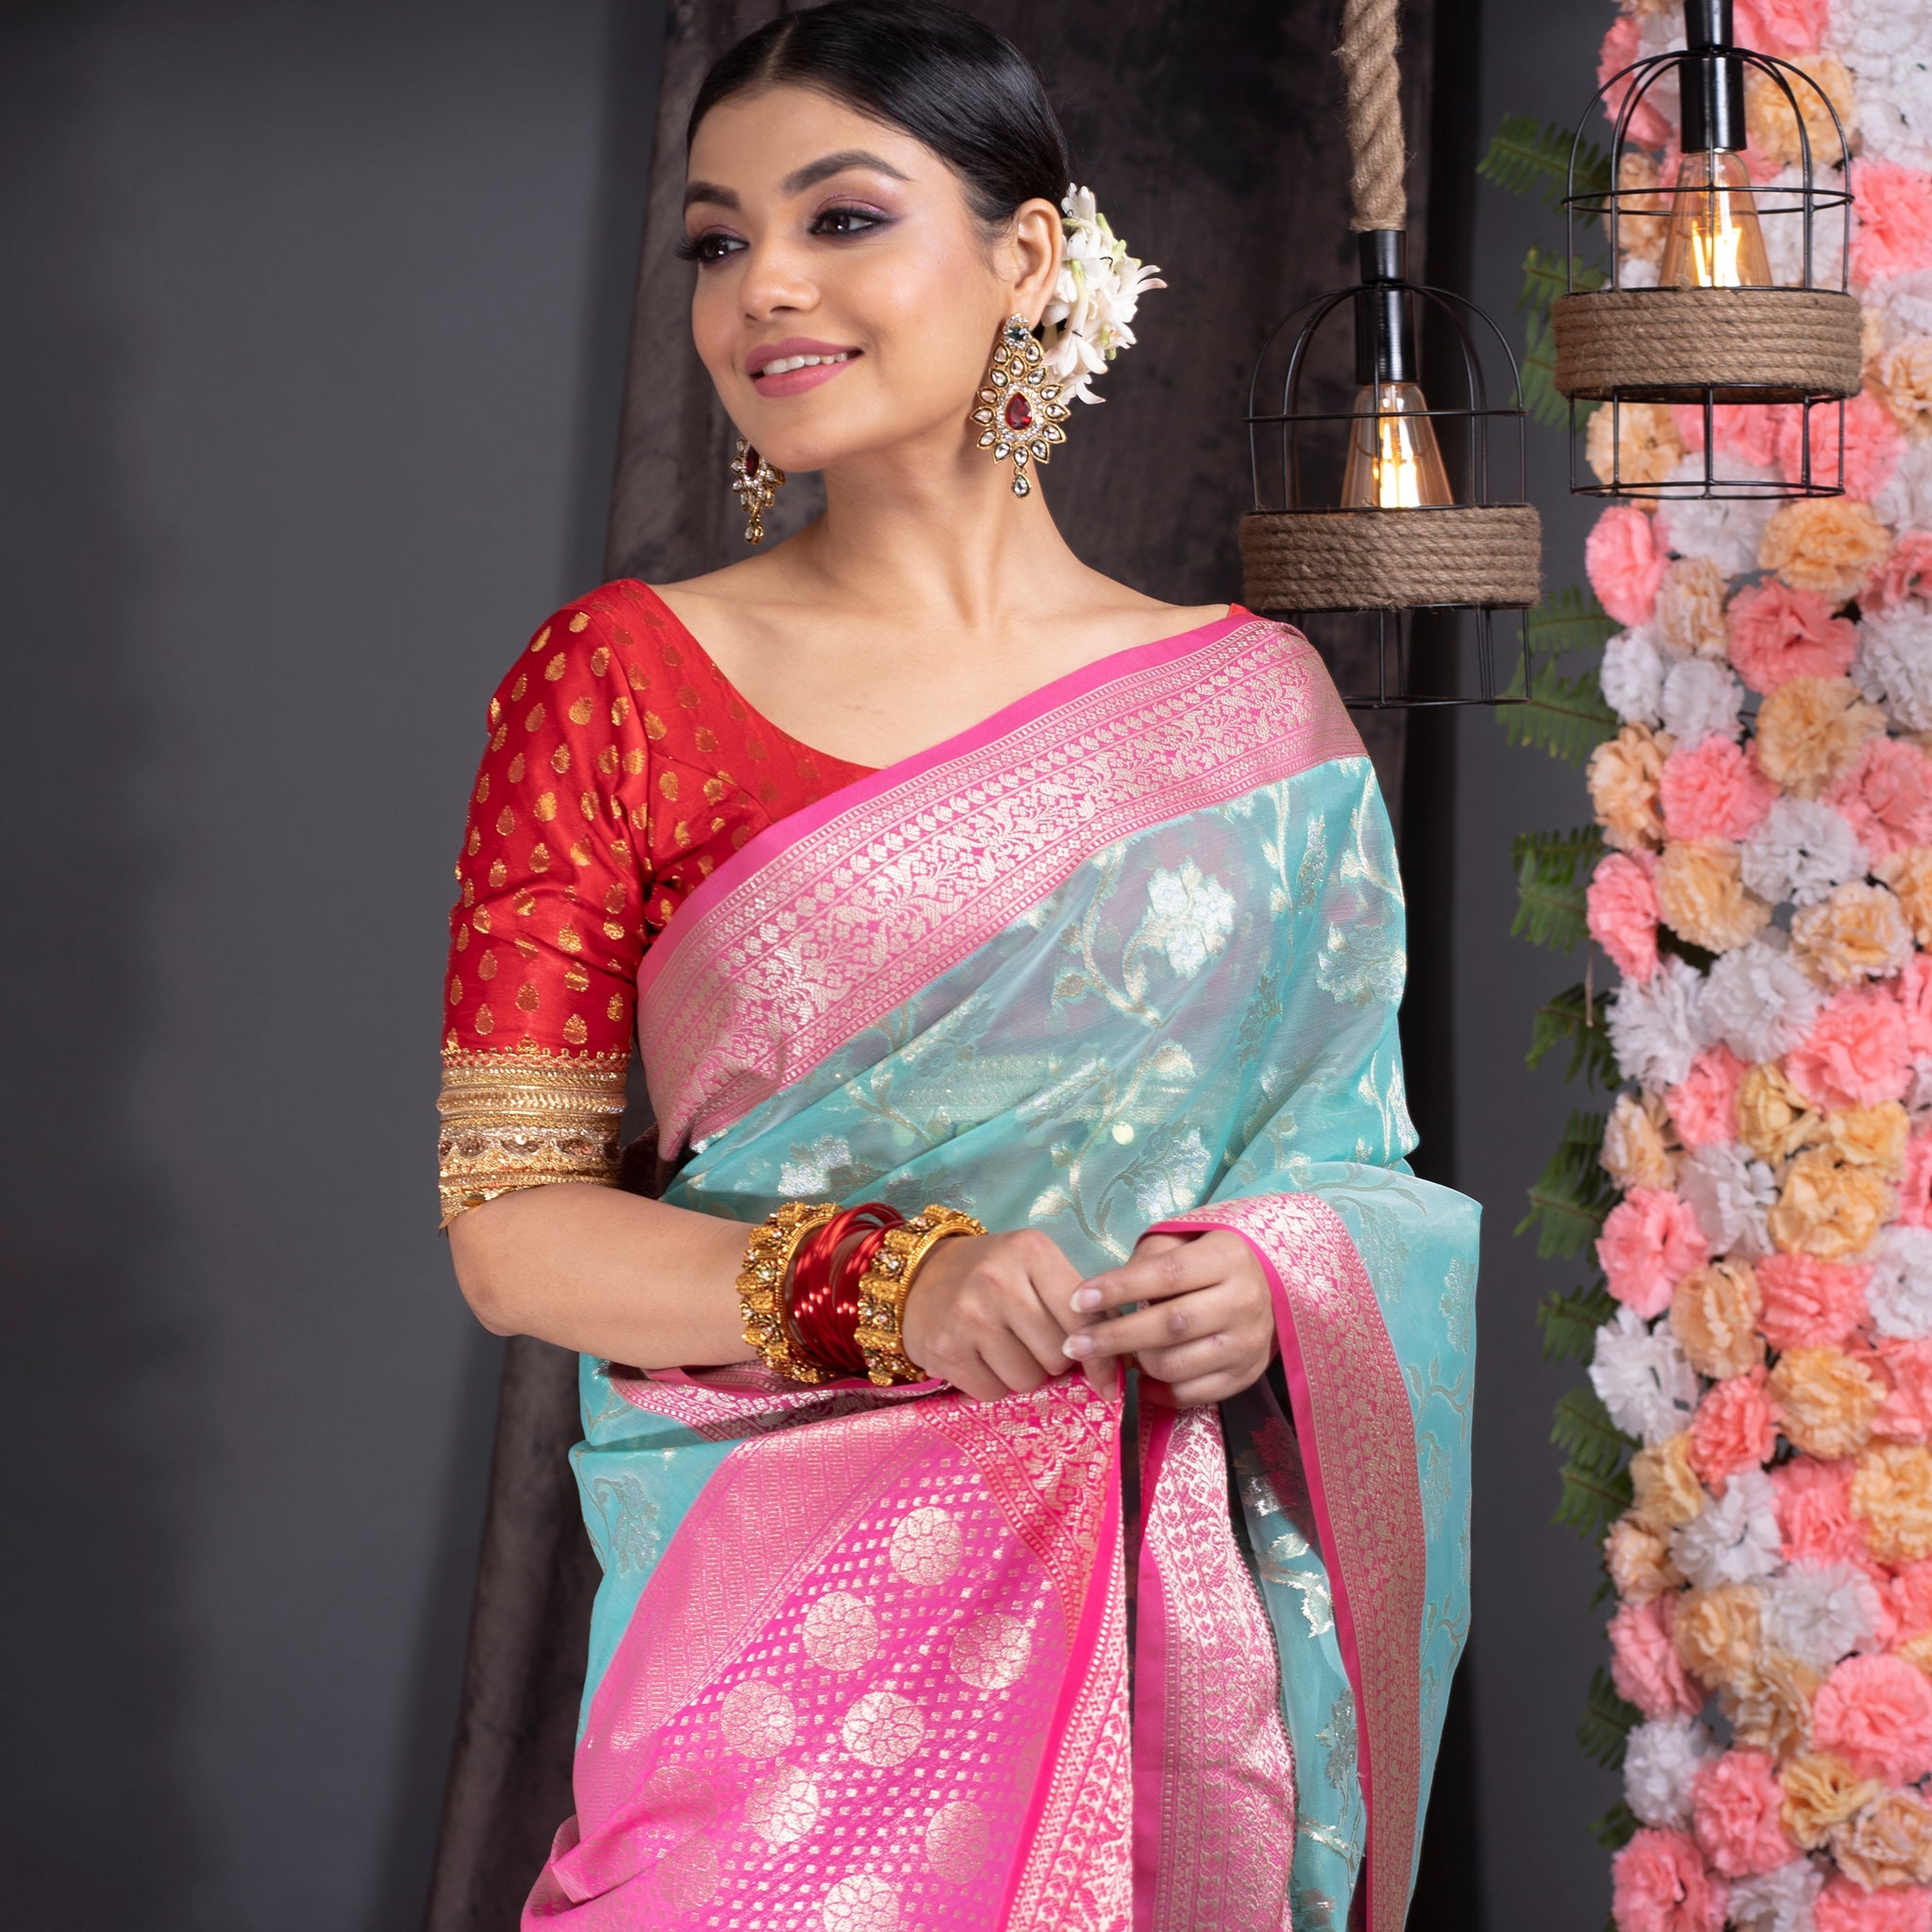 Women's Sea Green With Floral Zari Jaal Body And Contrasting Border Pallu - Boveee